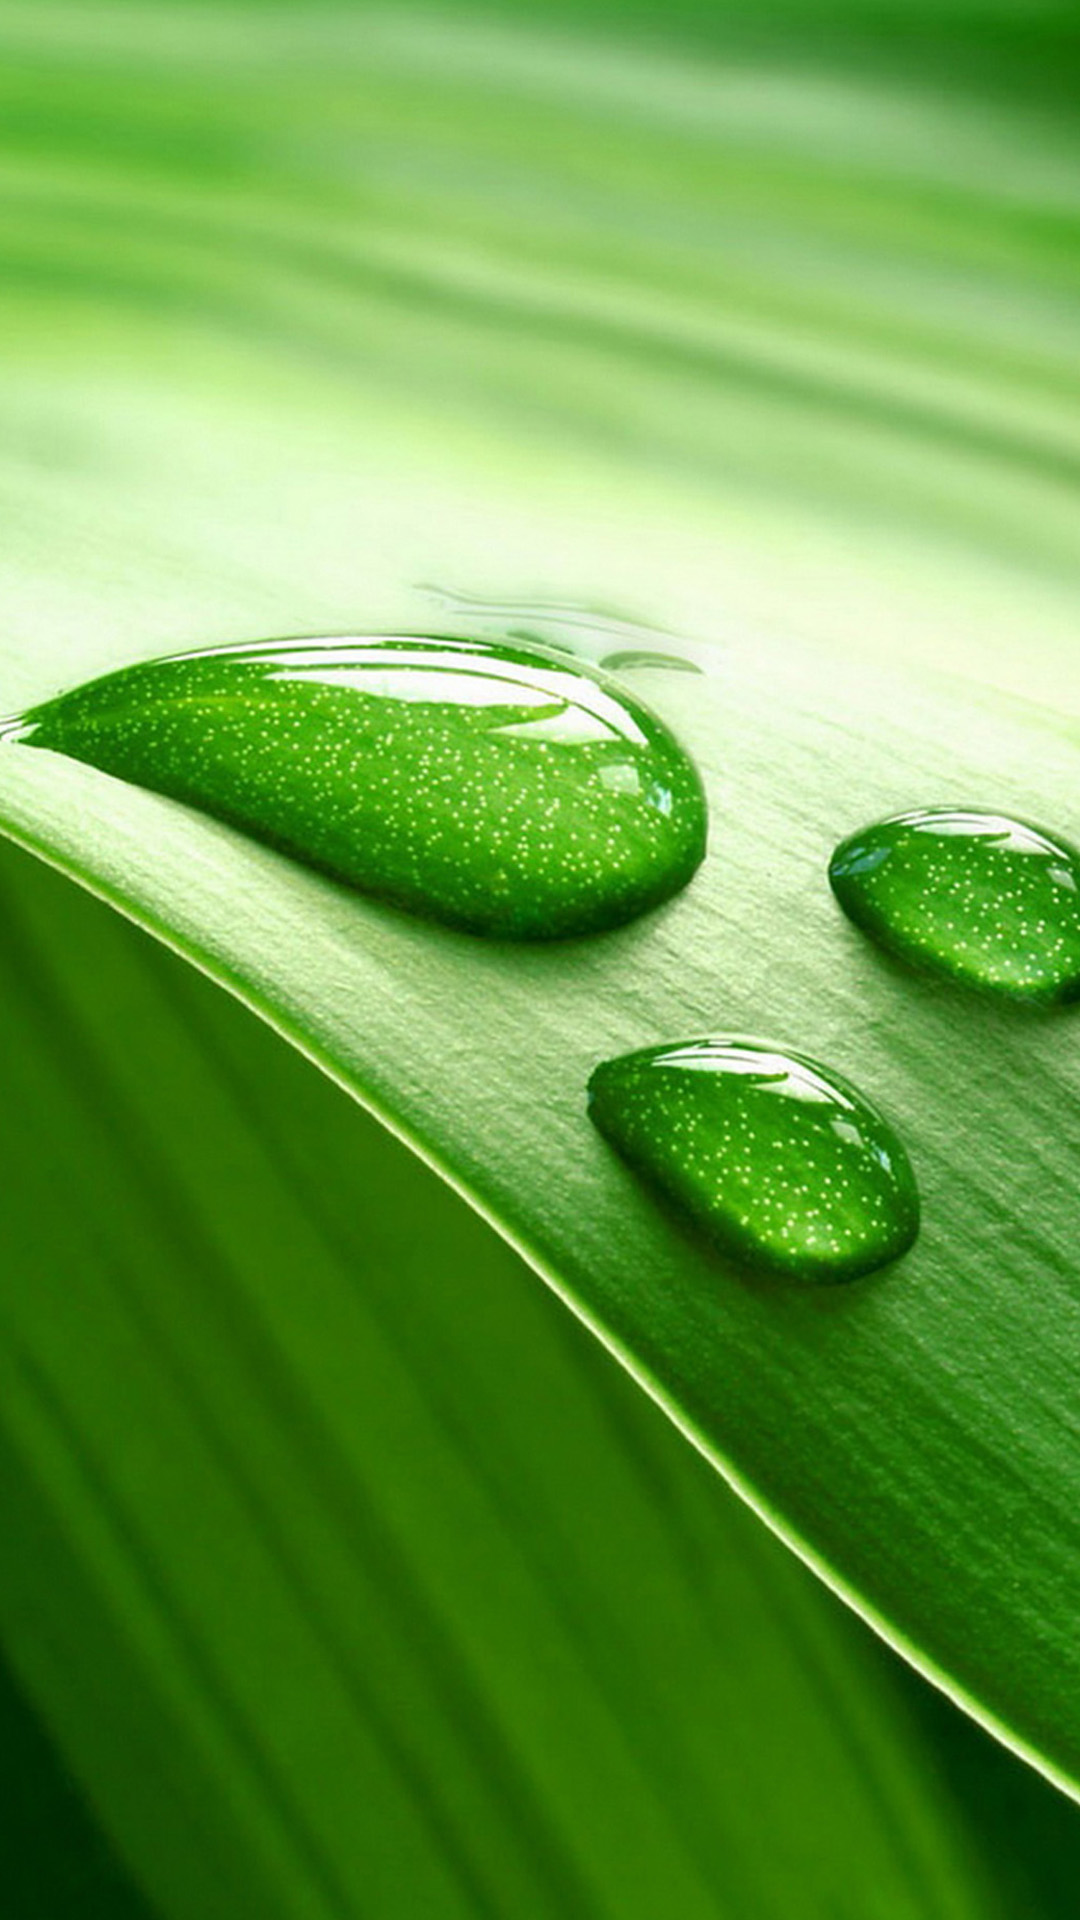 Samsung mobile Wallpaper - Green Leaf And Water Drop - 1080x1920